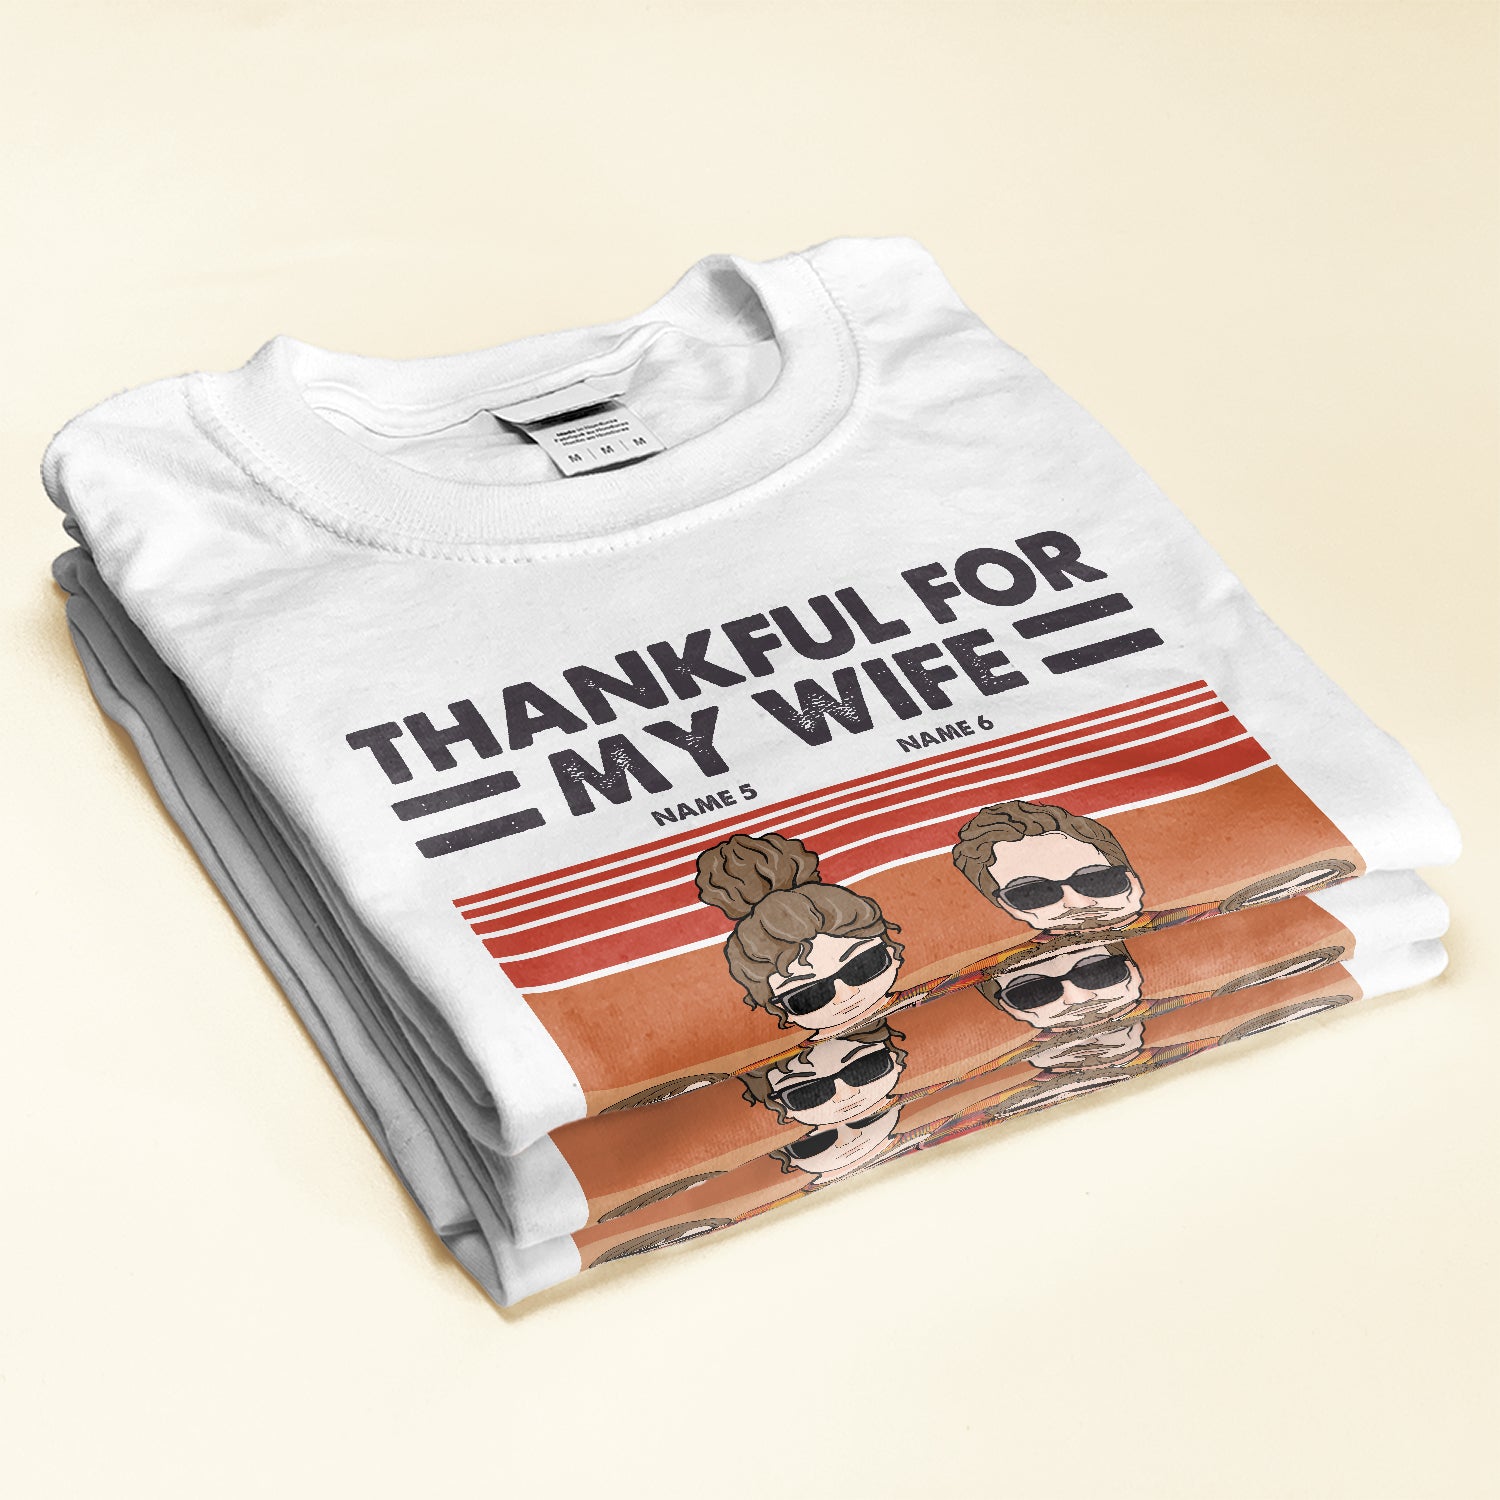 Thankful For My Wife And Kids - Personalized Shirt - Thanksgiving Gift For Husband